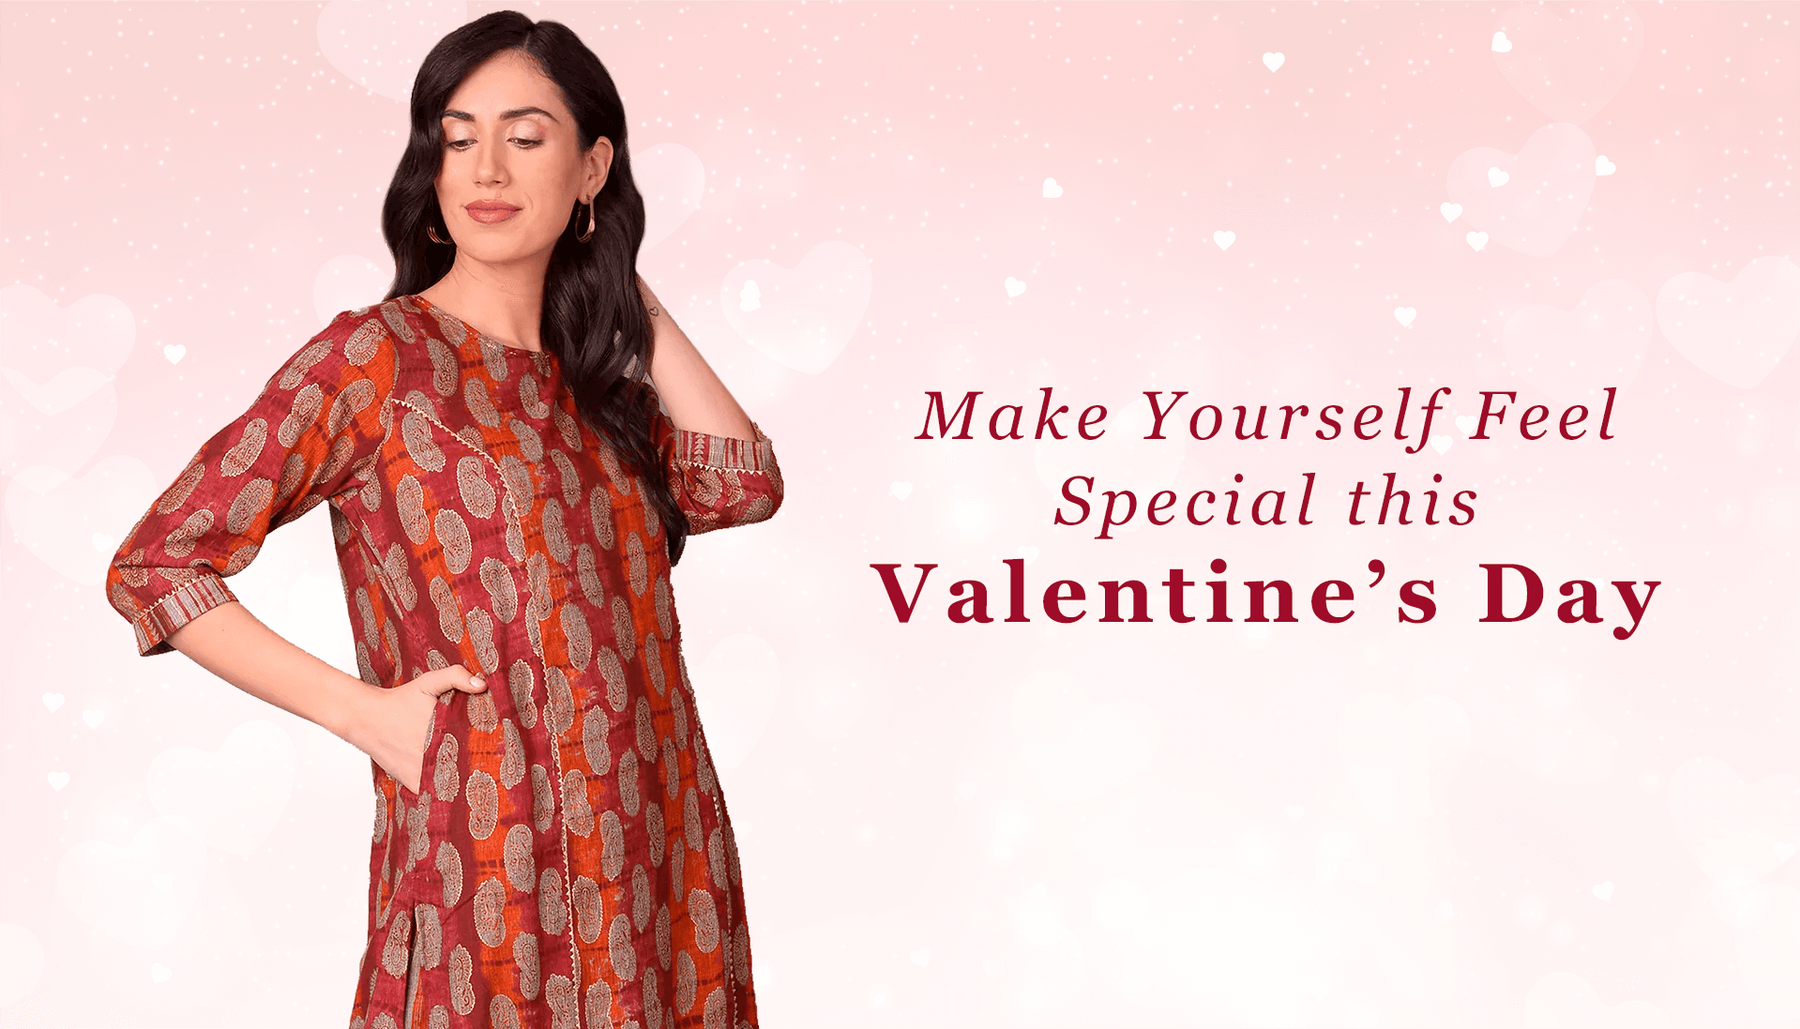 Make Yourself Feel Special this Valentine’s Day